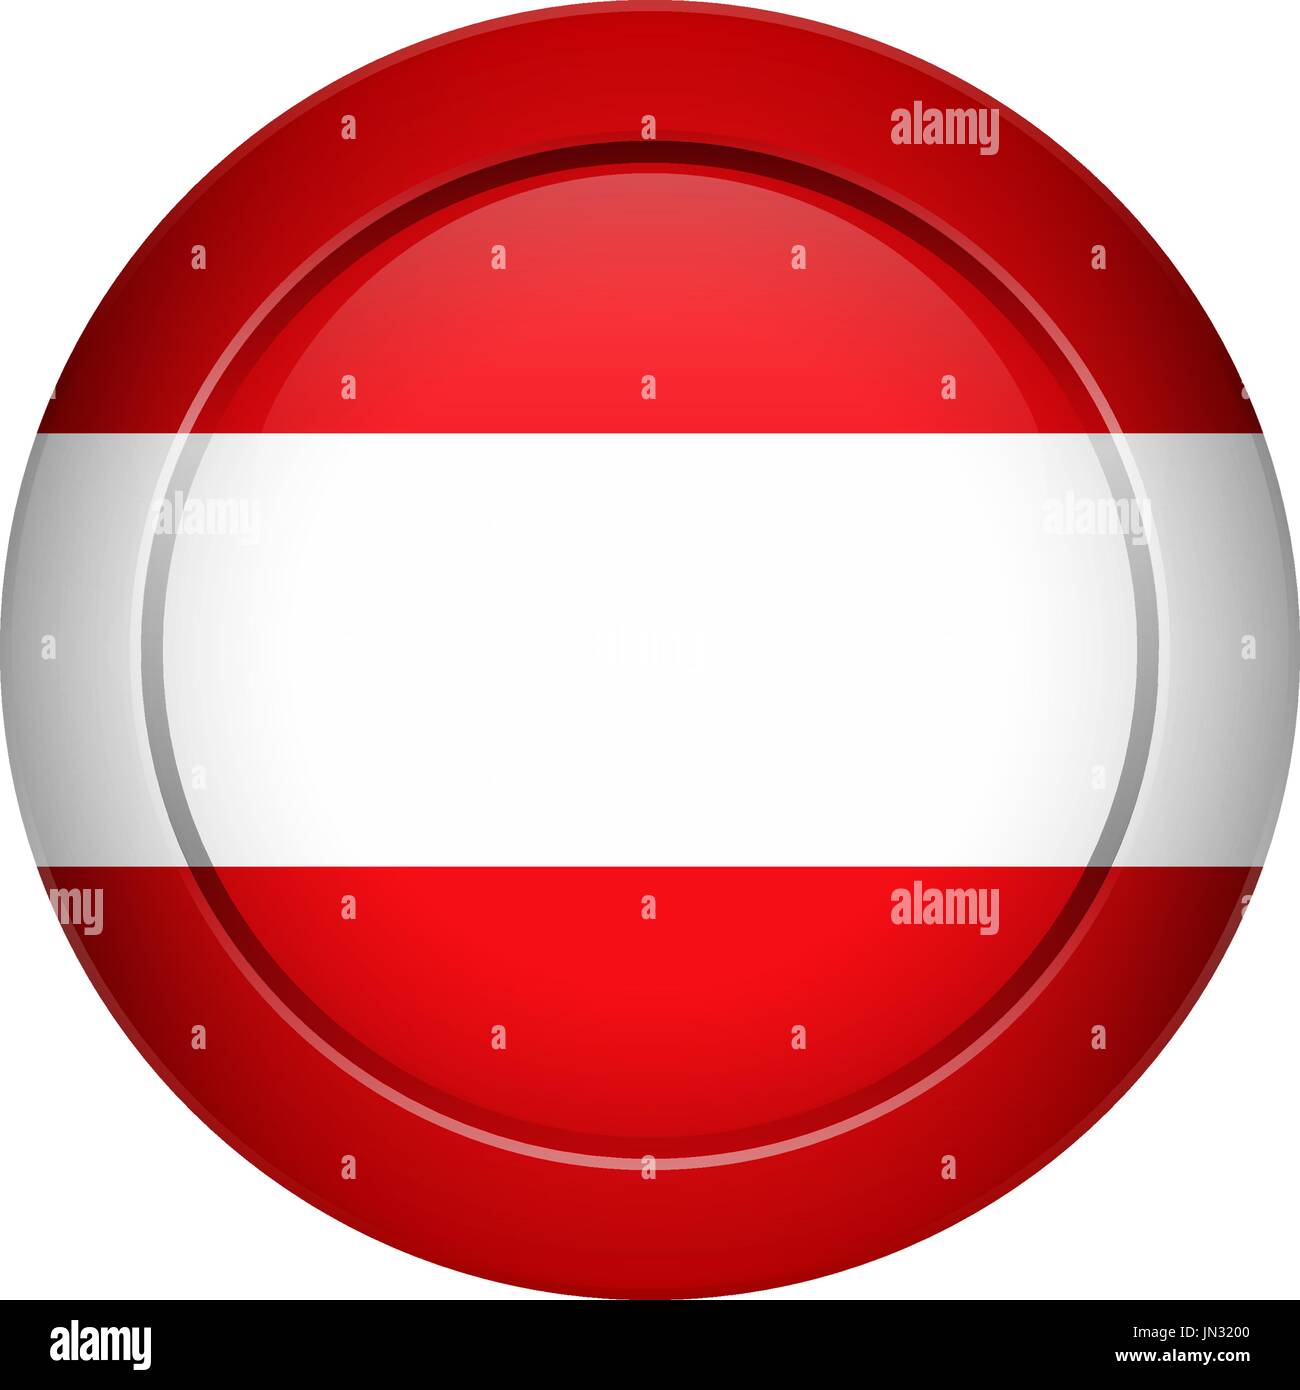 Flag design. Austrian flag on the round button. Isolated template for your designs. Vector illustration. Stock Vector